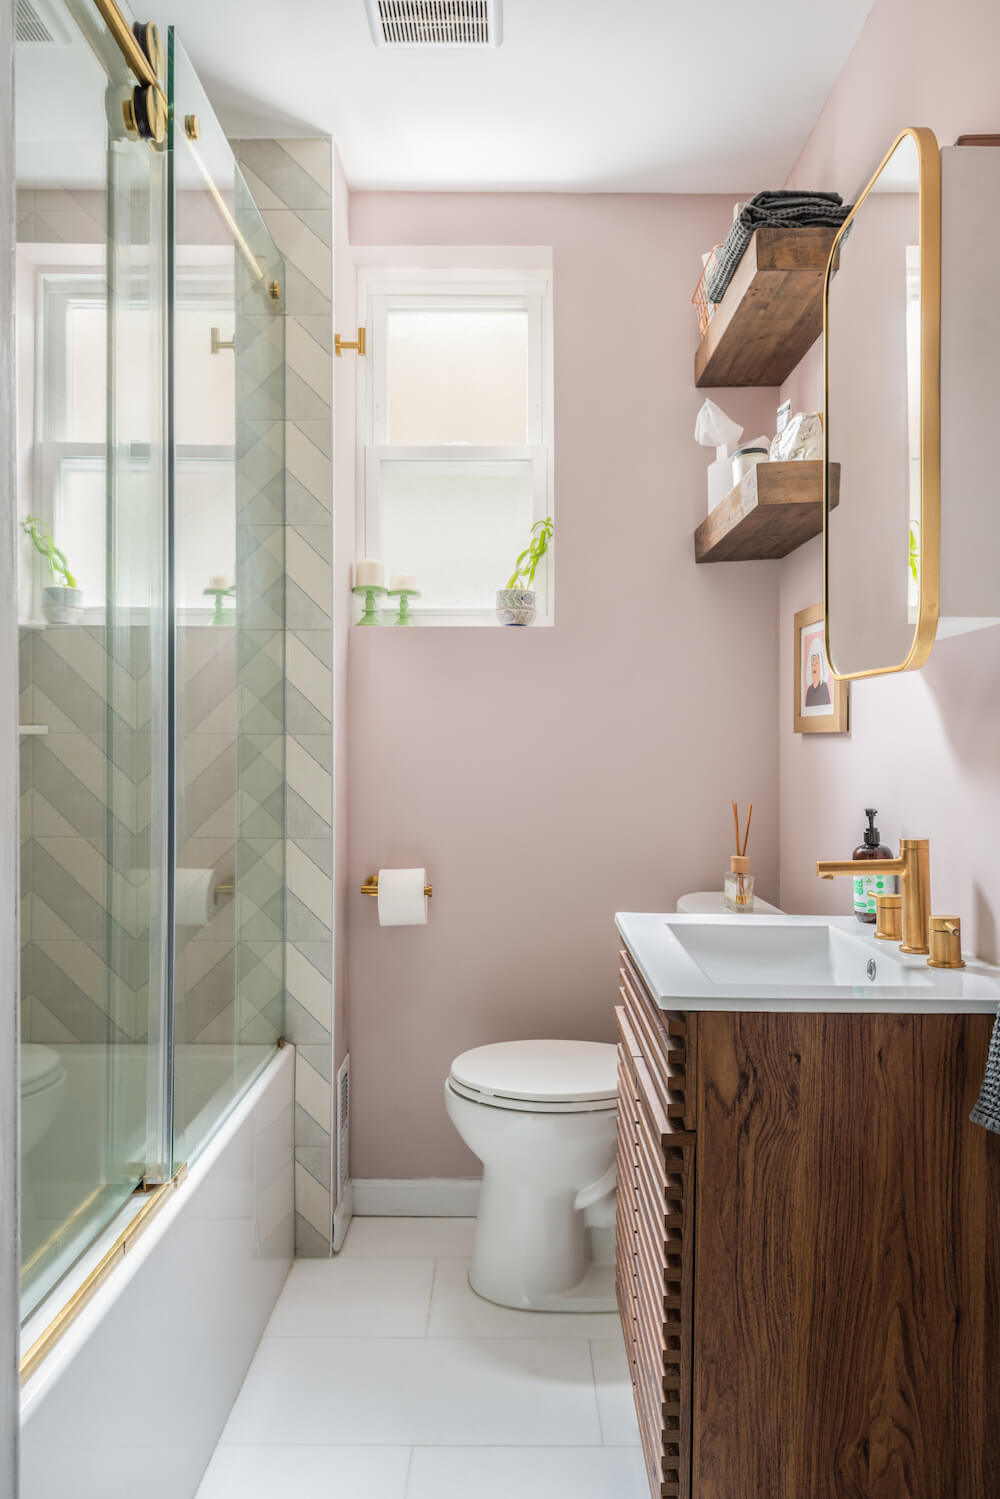 Bathroom with pink walls and wooden vanity